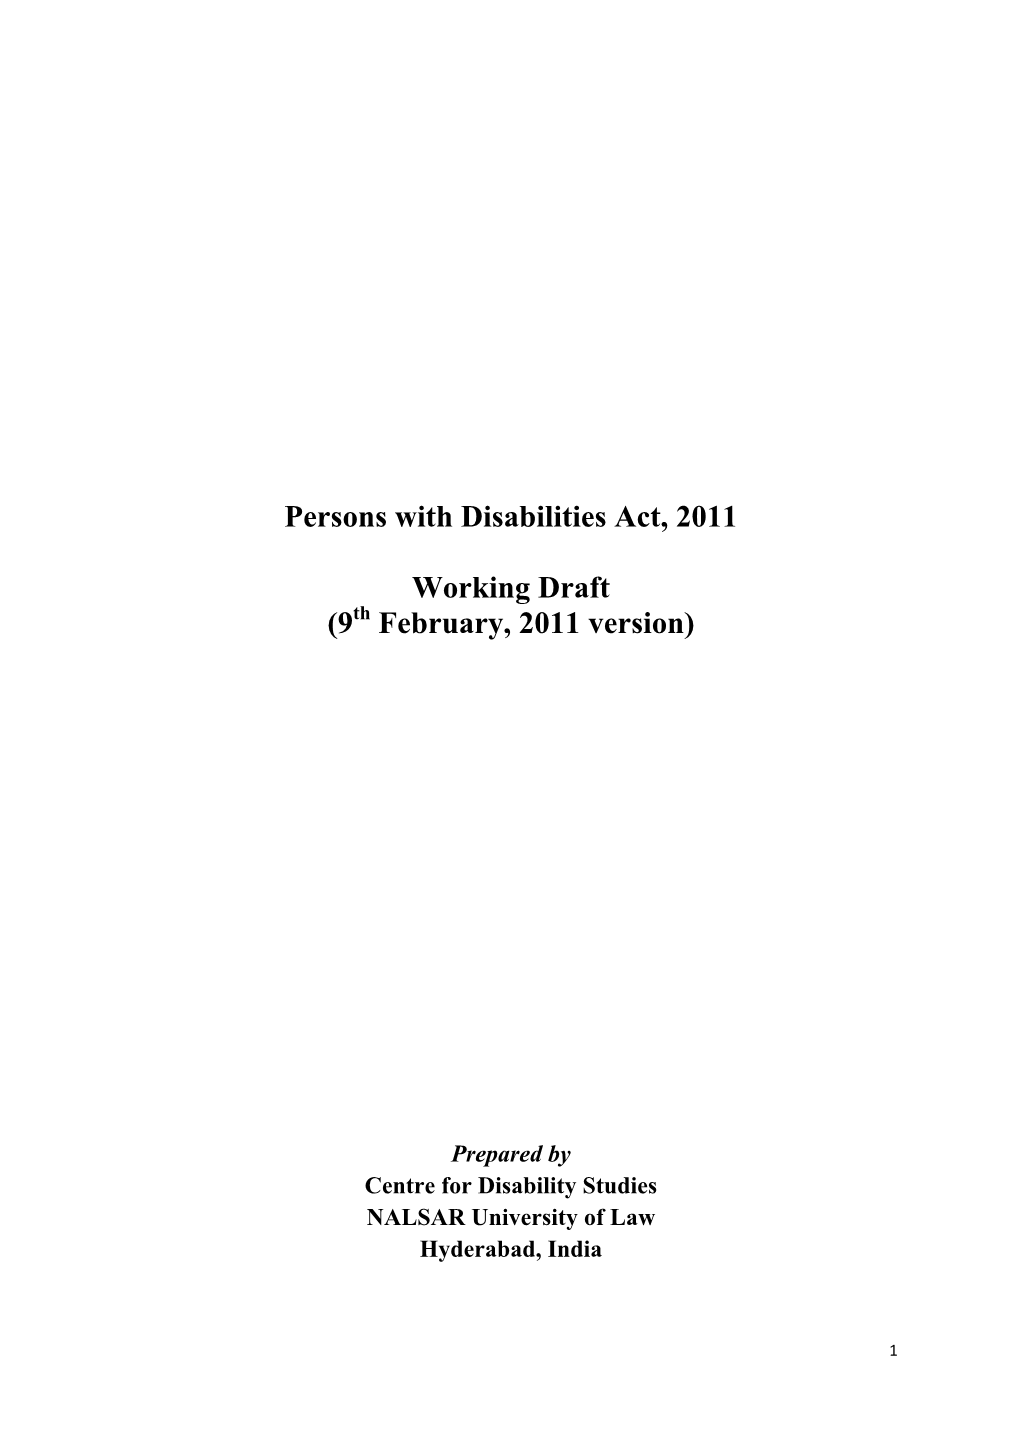 Persons with Disabilities Act, 2011 Working Draft (9